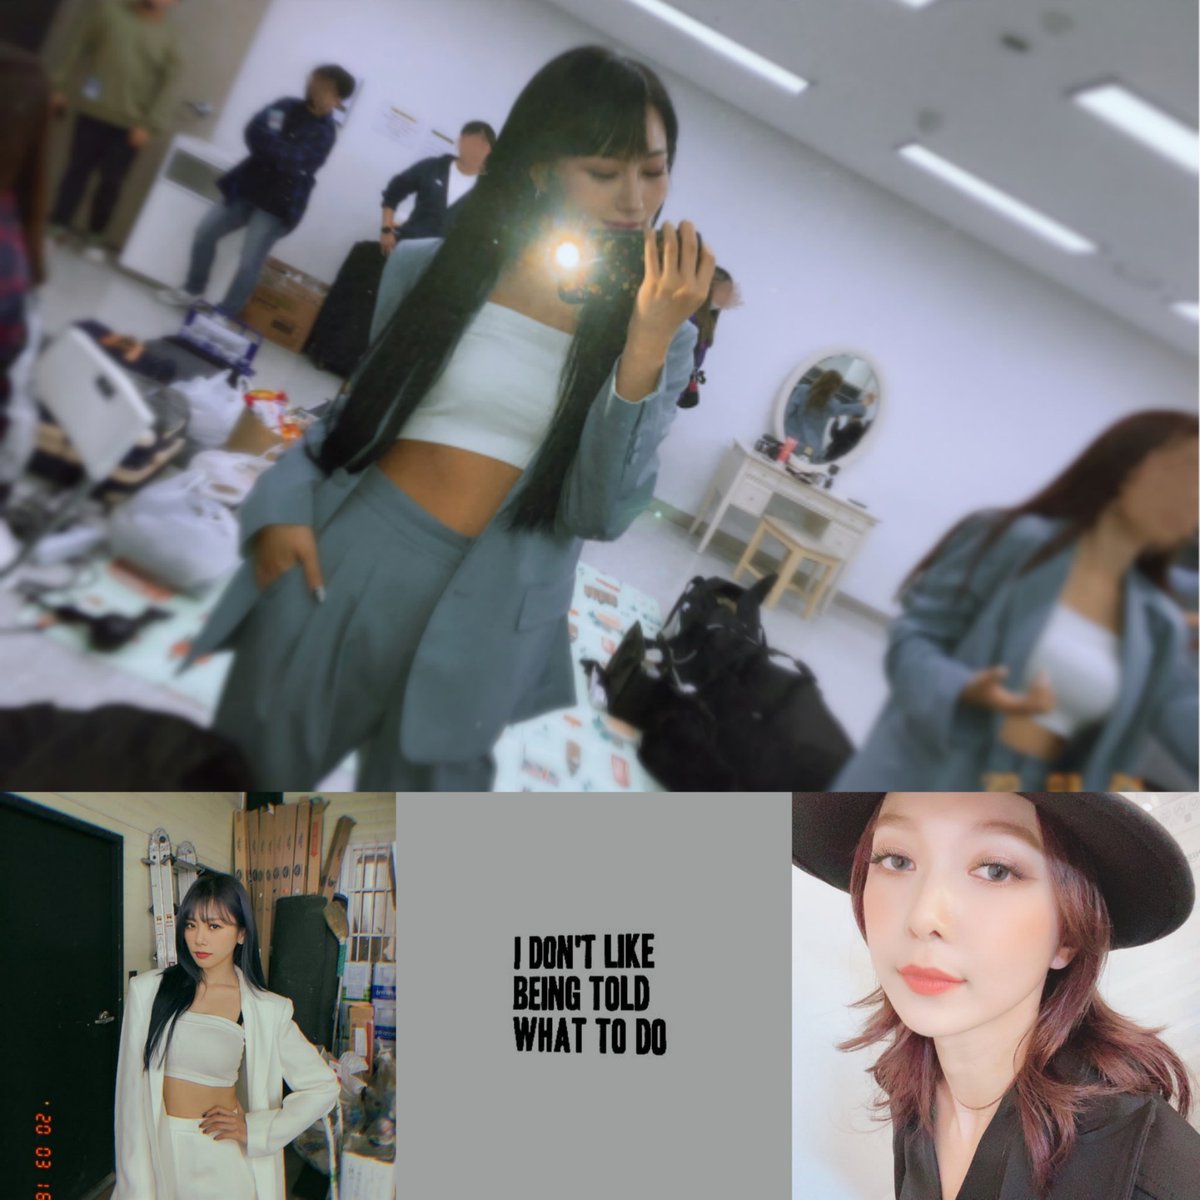 "i'll take a road in between"at her 21st birthday, siyeon has to decide between the light and the dark side. she's torn between joining her best friend minji on the light side and mysterious yubin on the dark side. but maybe she can find another way...